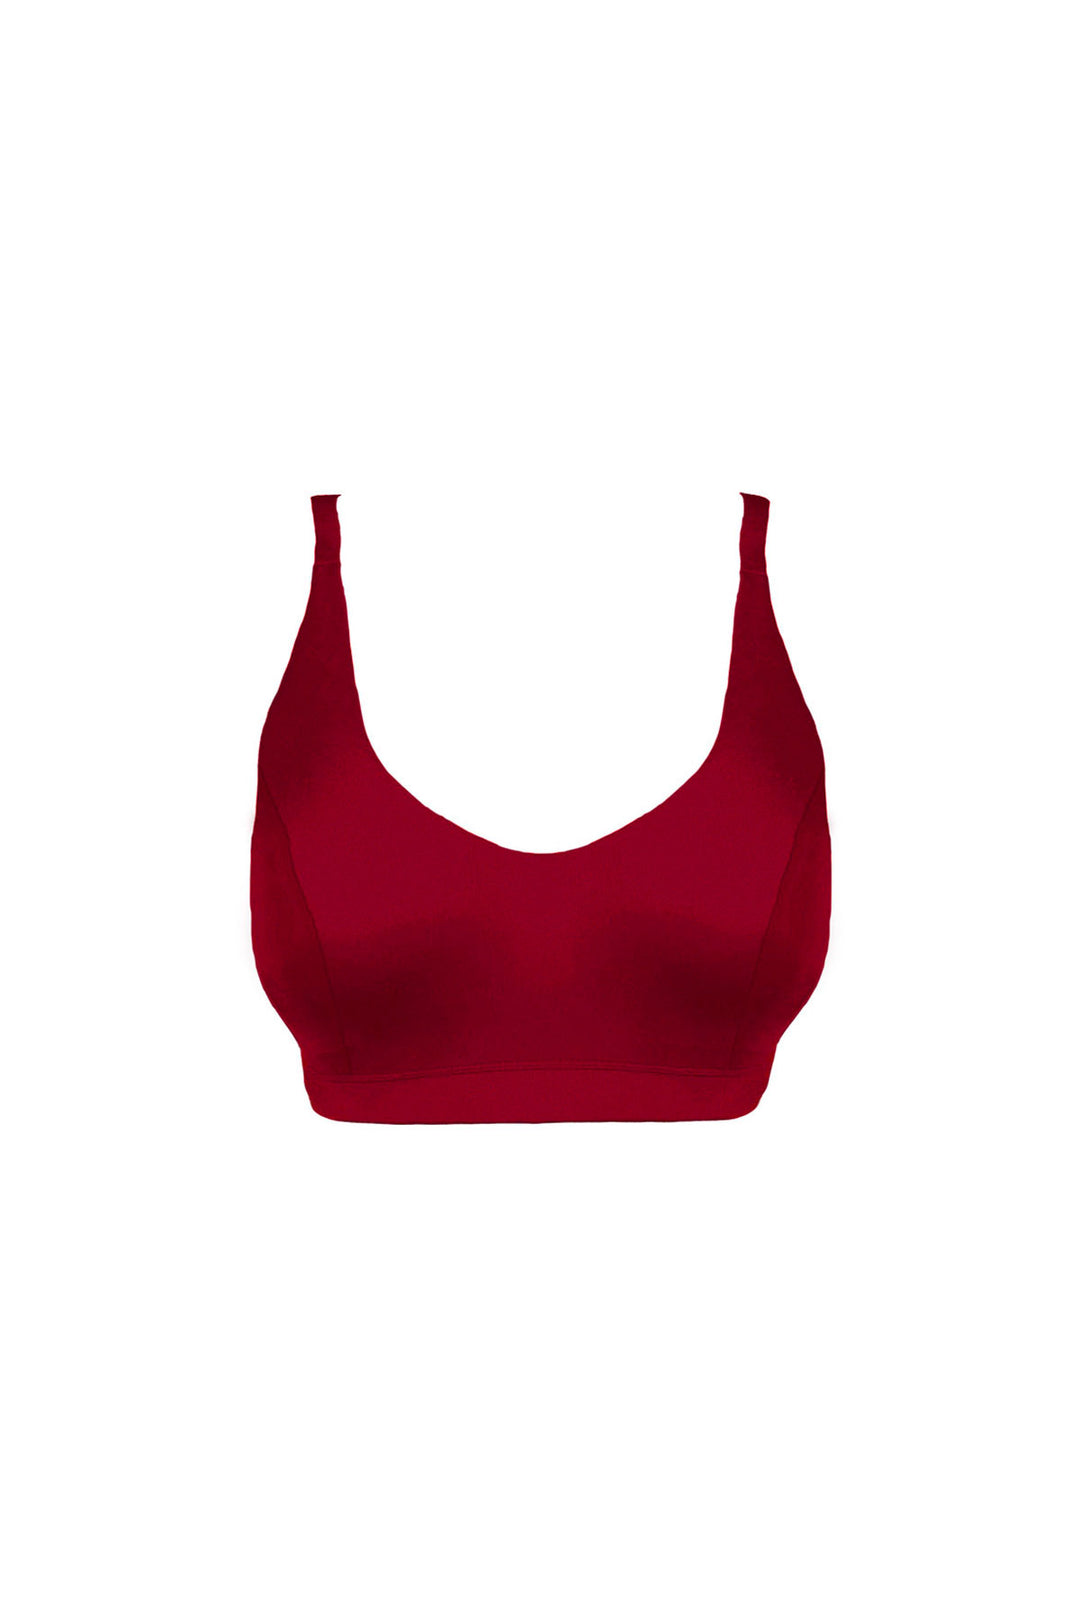 Sold out Siane Extra Full Cup Bralette in Garnet